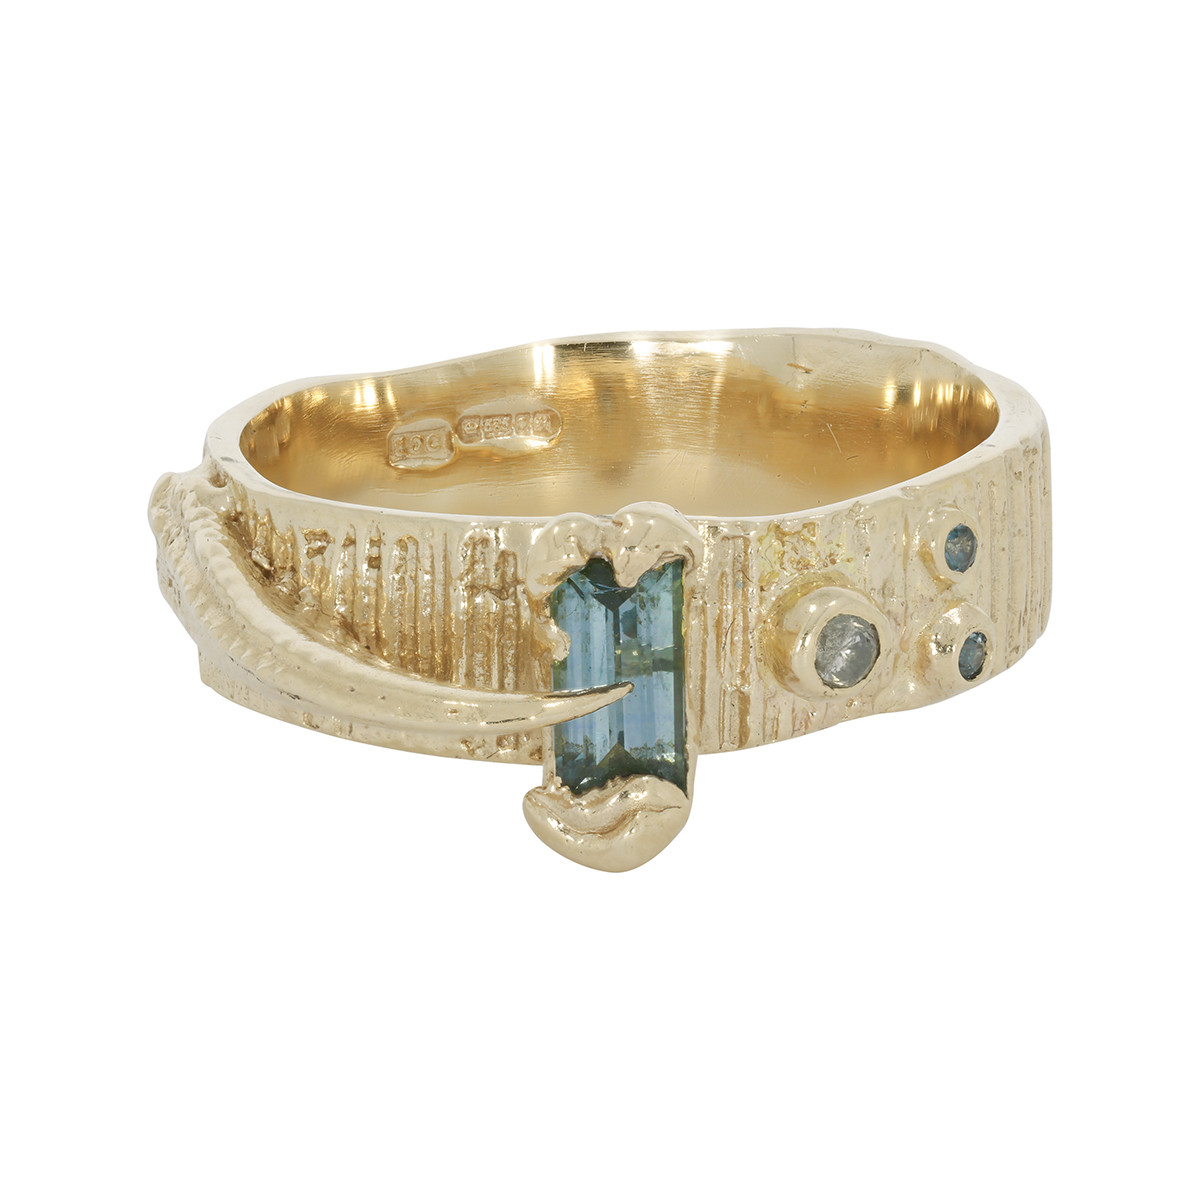 Eily O'Connell: Sapphire Blue Barrel 14ct Yellow Gold, tomfoolery